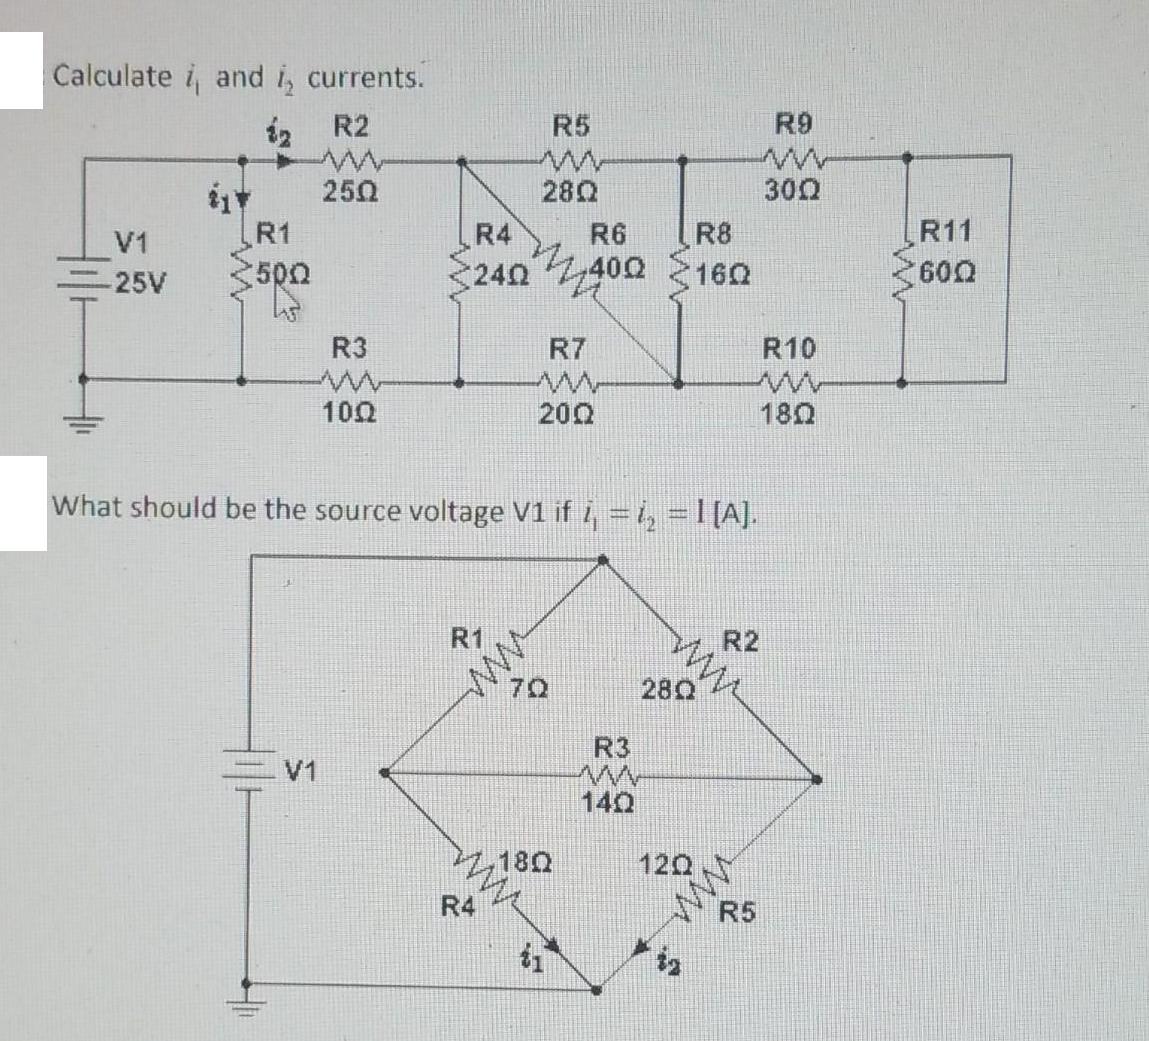 Calculate i, and is currents. 12 R2 250 V1 -25V R1 :500 R3 V1 100 R4 R6 R8 240400 160 R1 28Q What should be